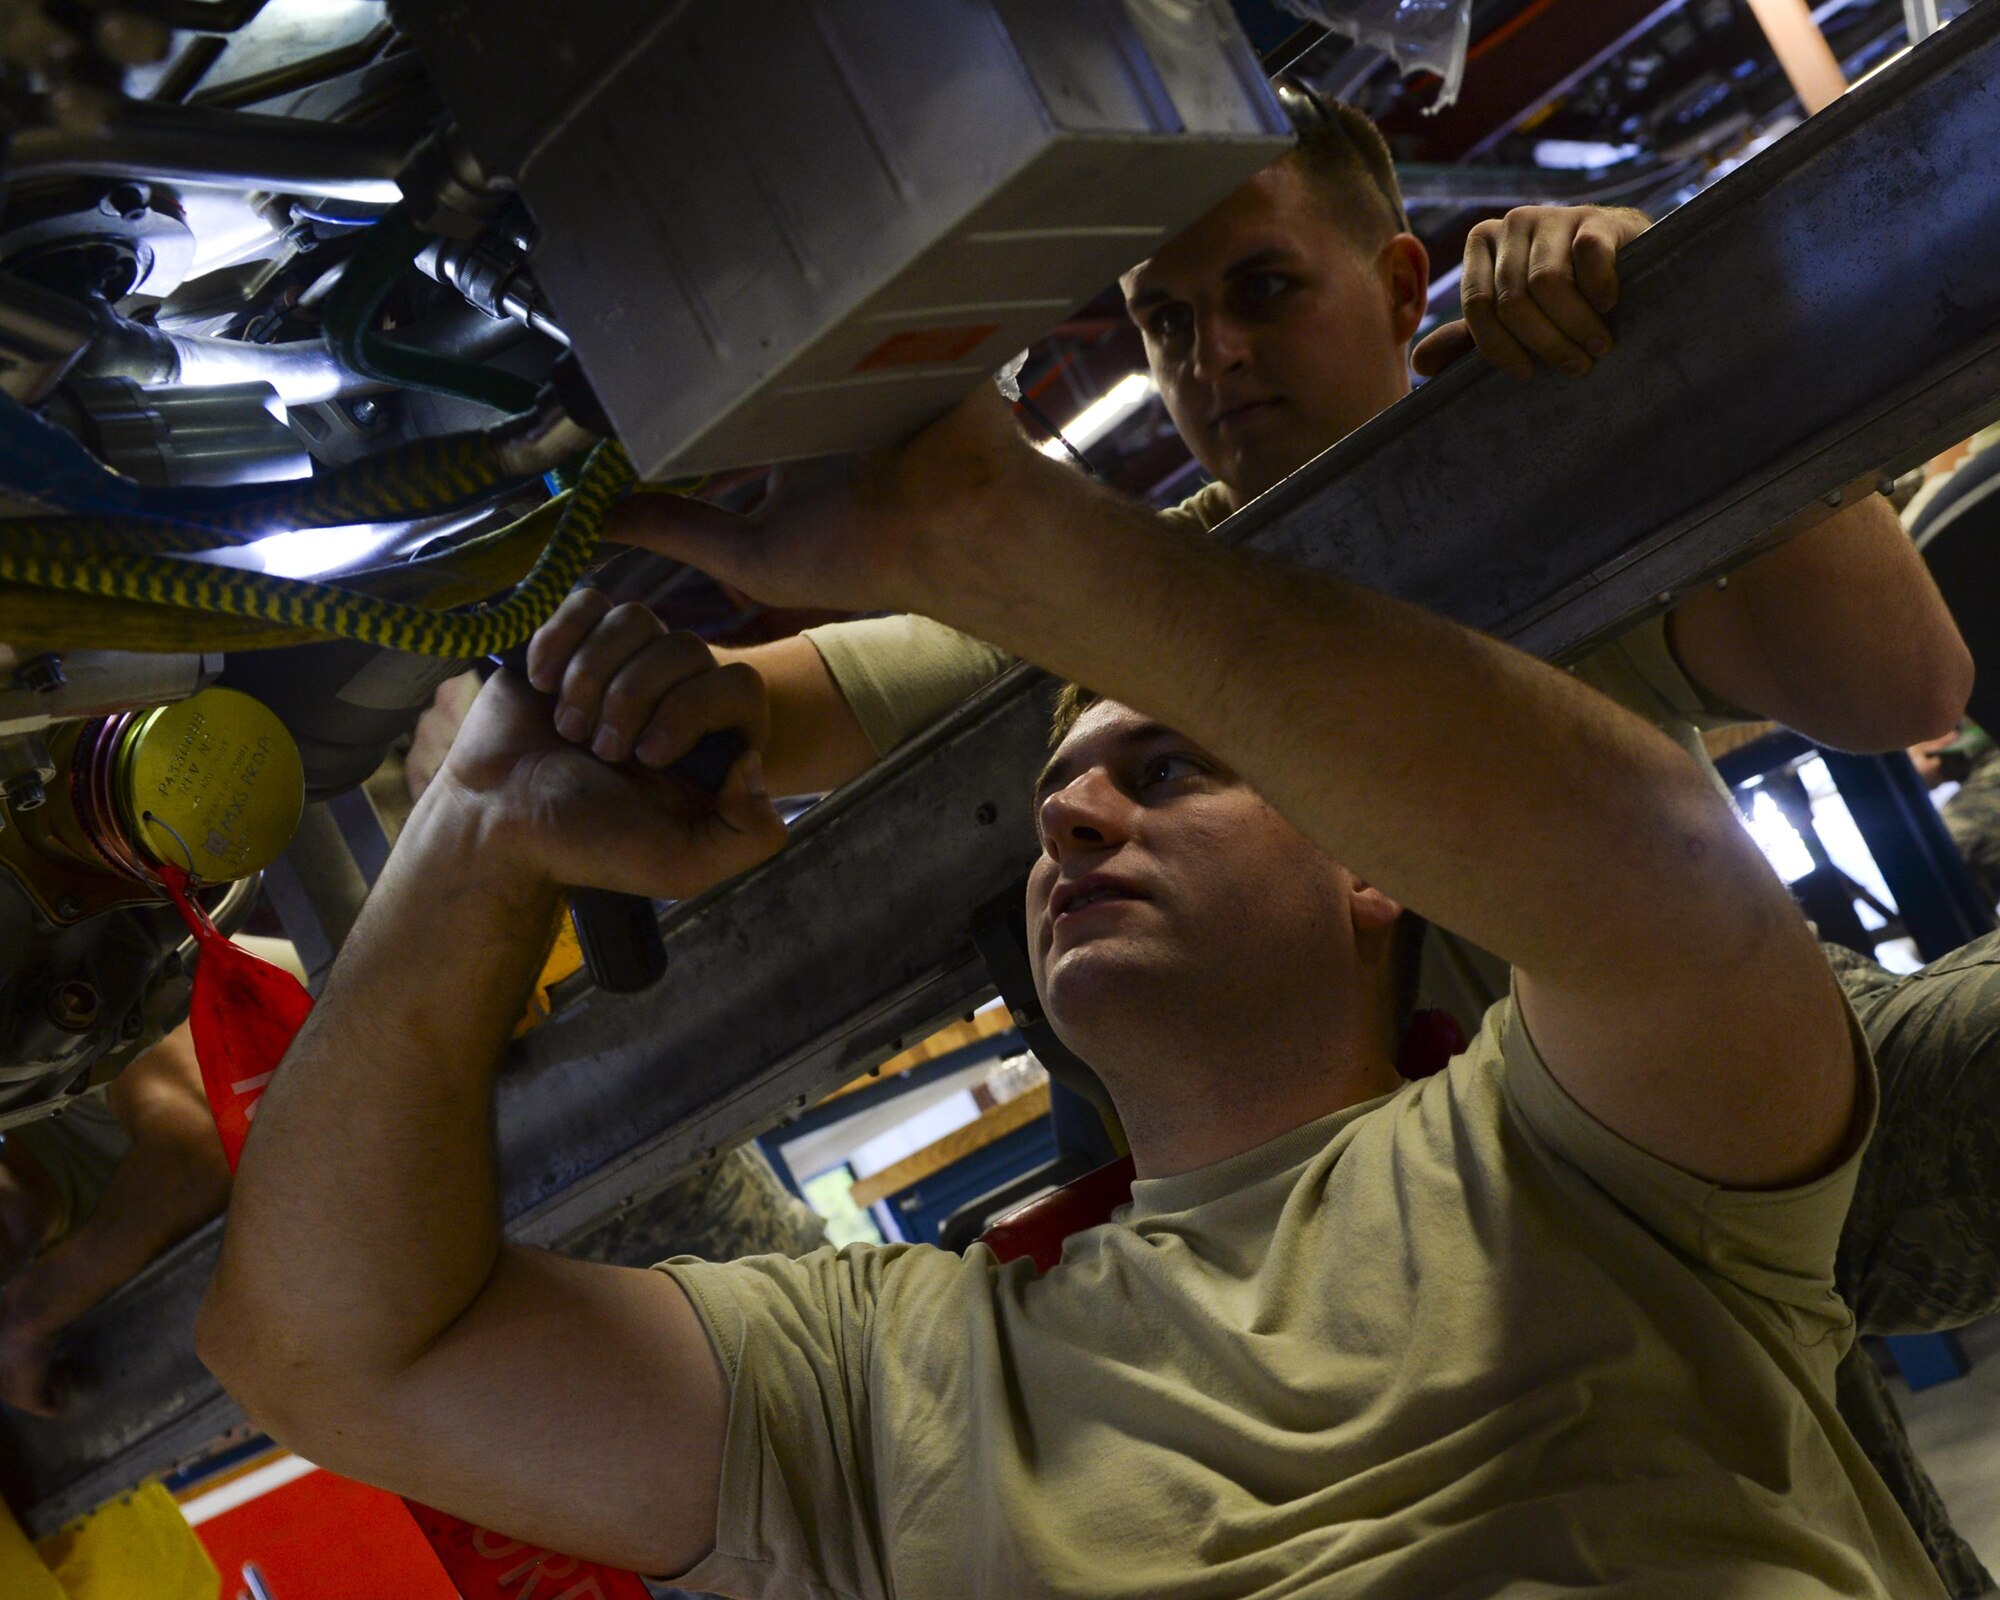 U.S. Air Force Staff Sgt. Cody Hammond, bottom, and Senior Airman Dwane Traynor, 325th Maintenance Squadron aerospace propulsion technicians, inspect the underside of an F-119 engine in the Propulsion Flight hangar at Tyndall Air Force Base, Fla., Aug. 29, 2016. Propulsion flight Airmen perform inspections to ensure the engines are safe for use in the F-22 Raptor. (U.S. Air Force photo by Airman 1st Class Cody R. Miller/Released)

